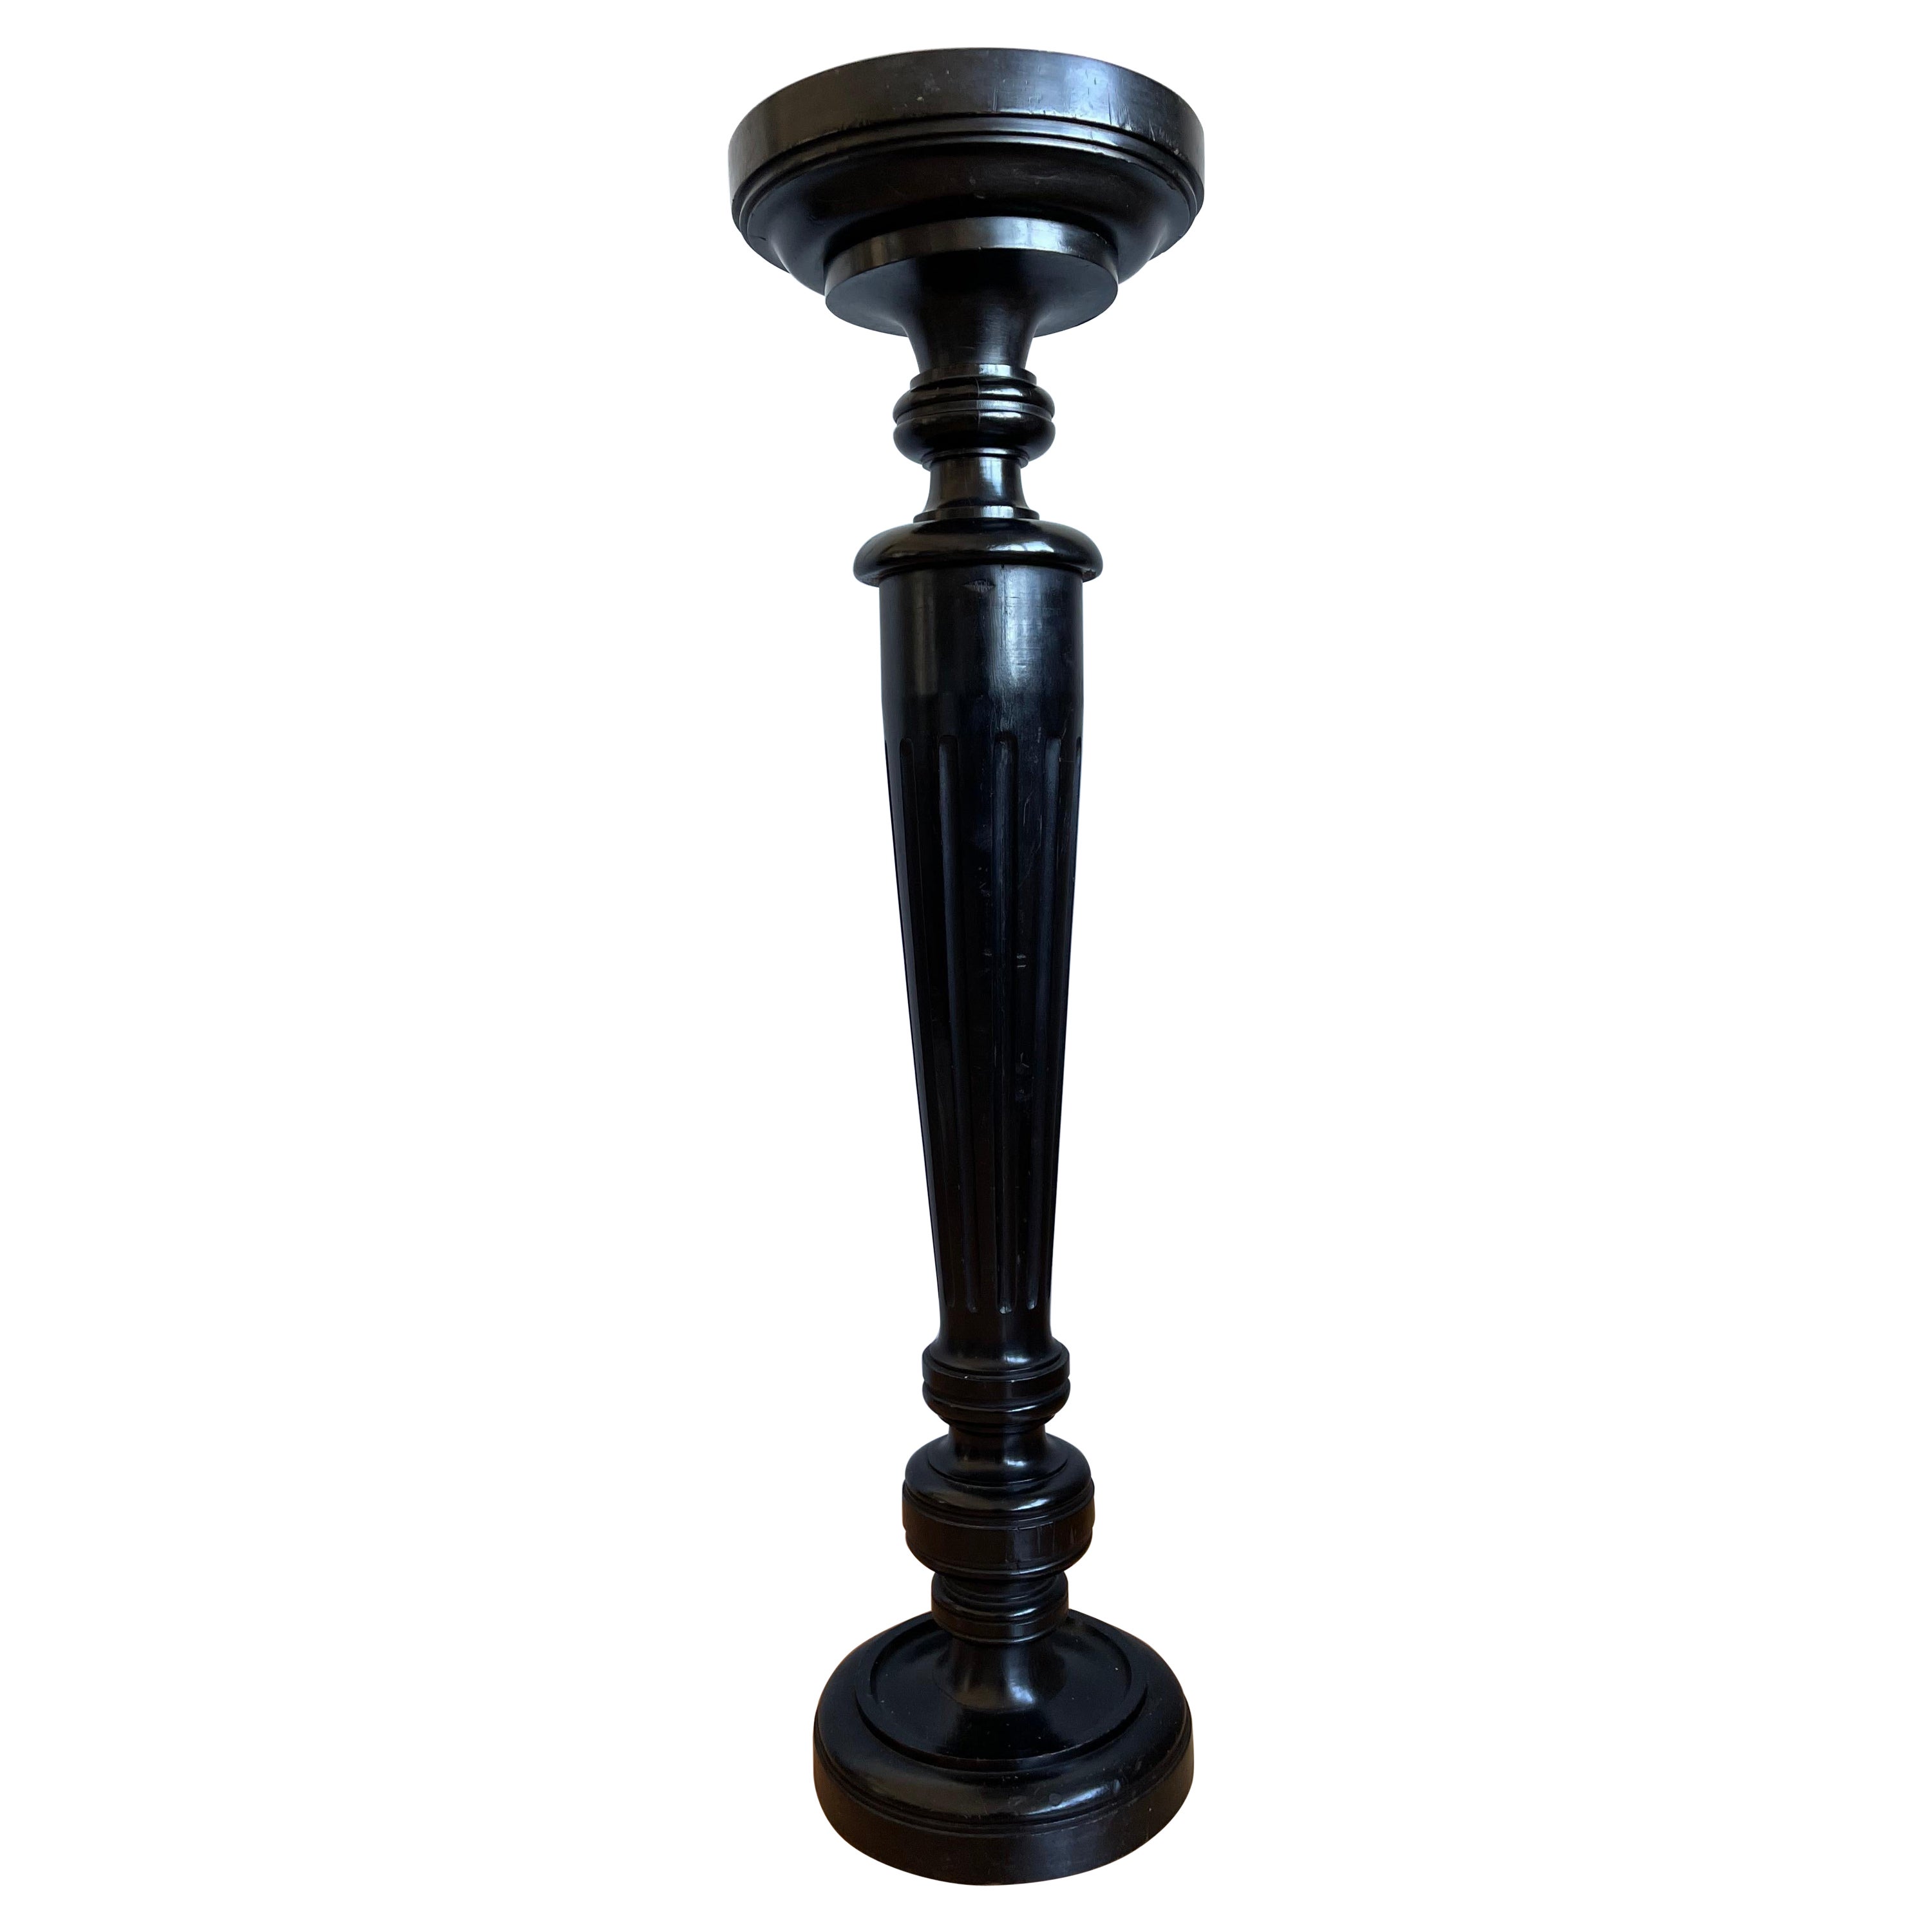 Stylish and Great Looking Antique, Ebonized Column Flower / Plant Pedestal Stand